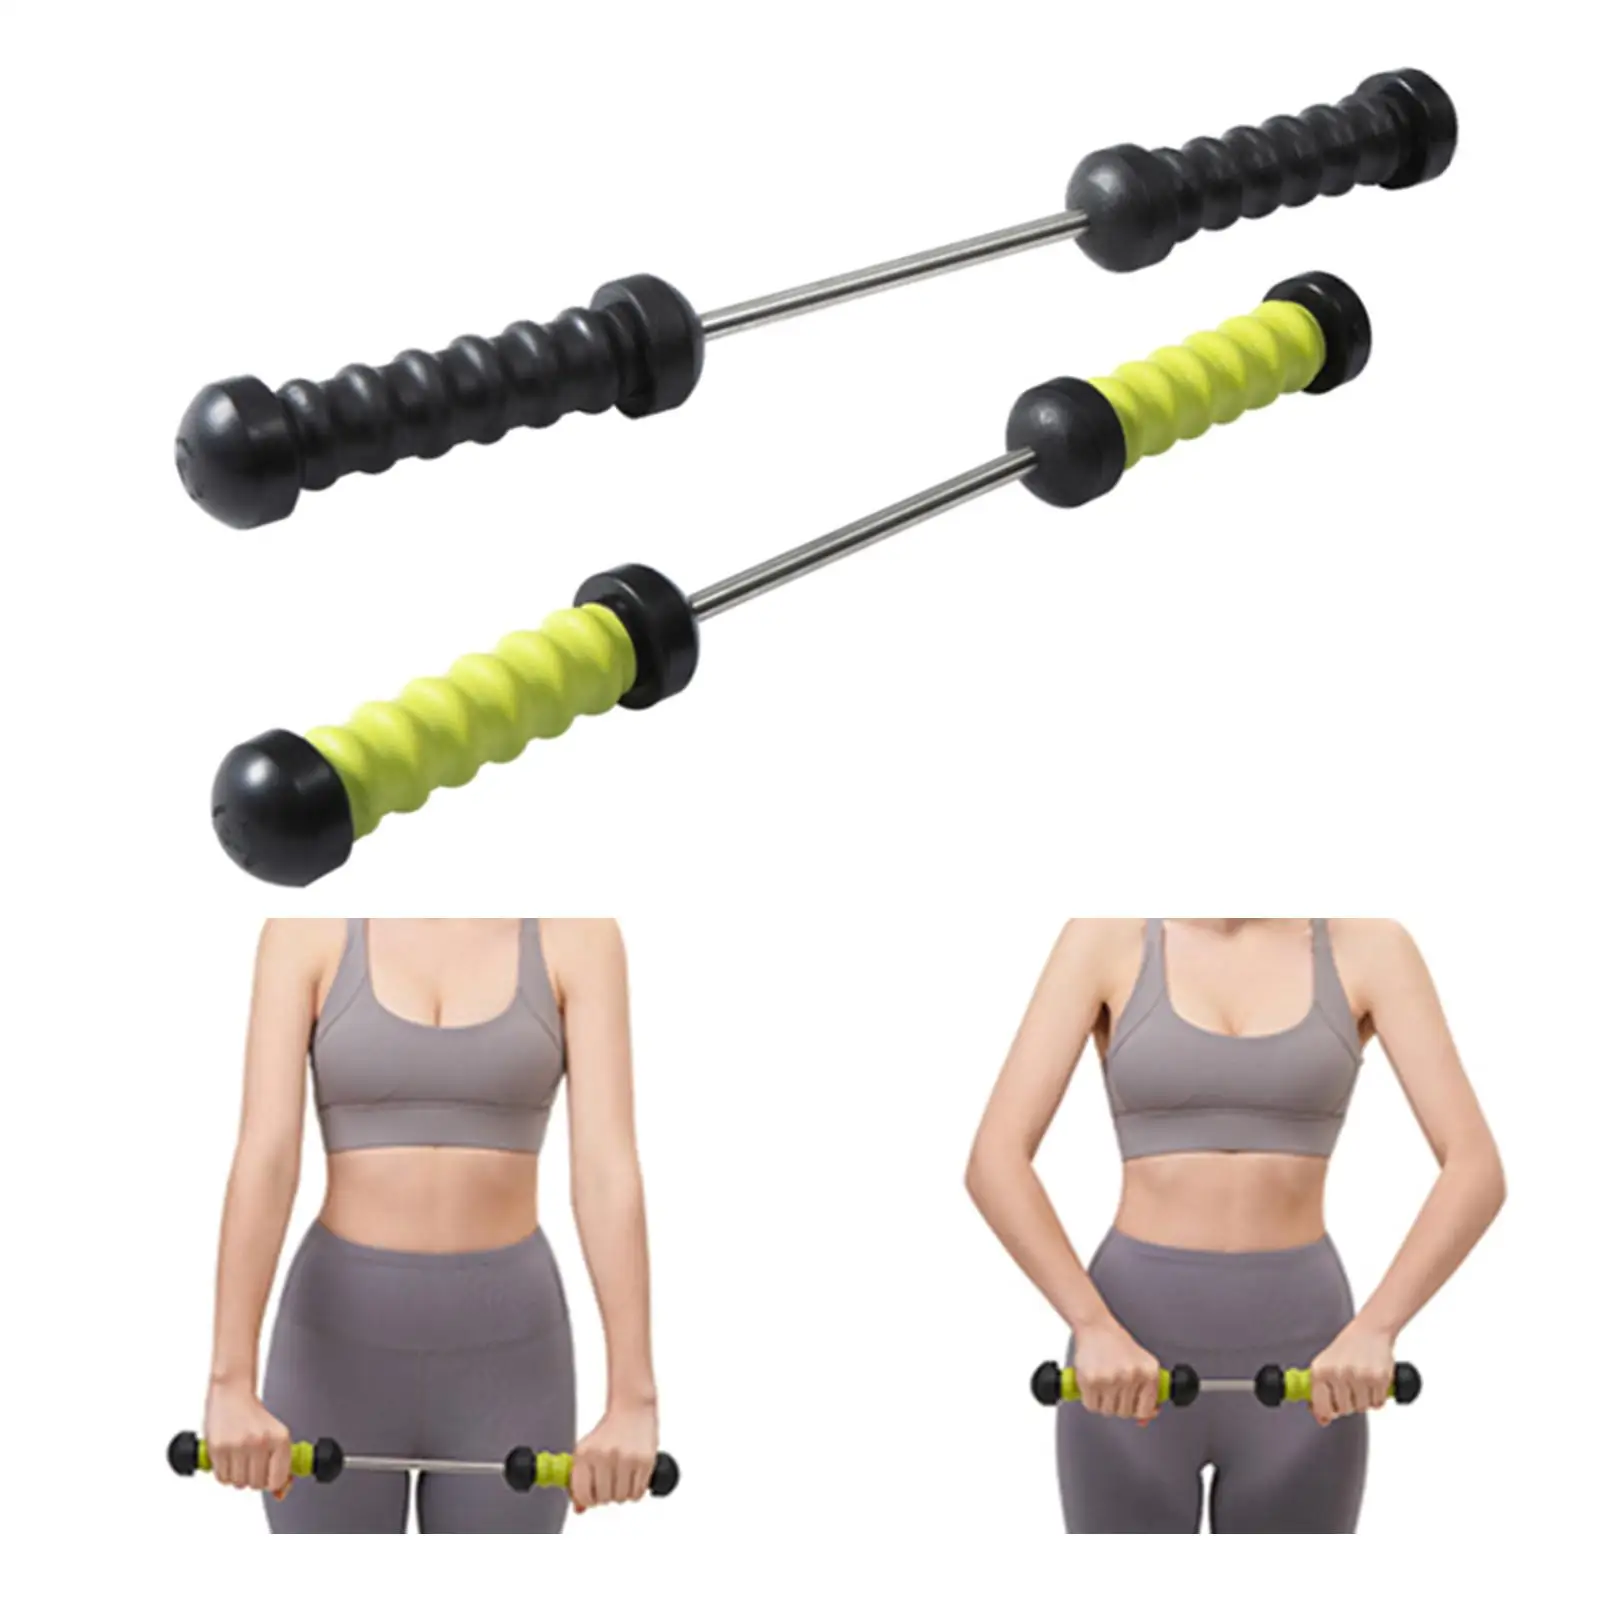 Arm Power Exerciser Muscle Training Chest Expander Power Bar Pull Bar Resistance Exercise Bands for Home Back Workout Women Men